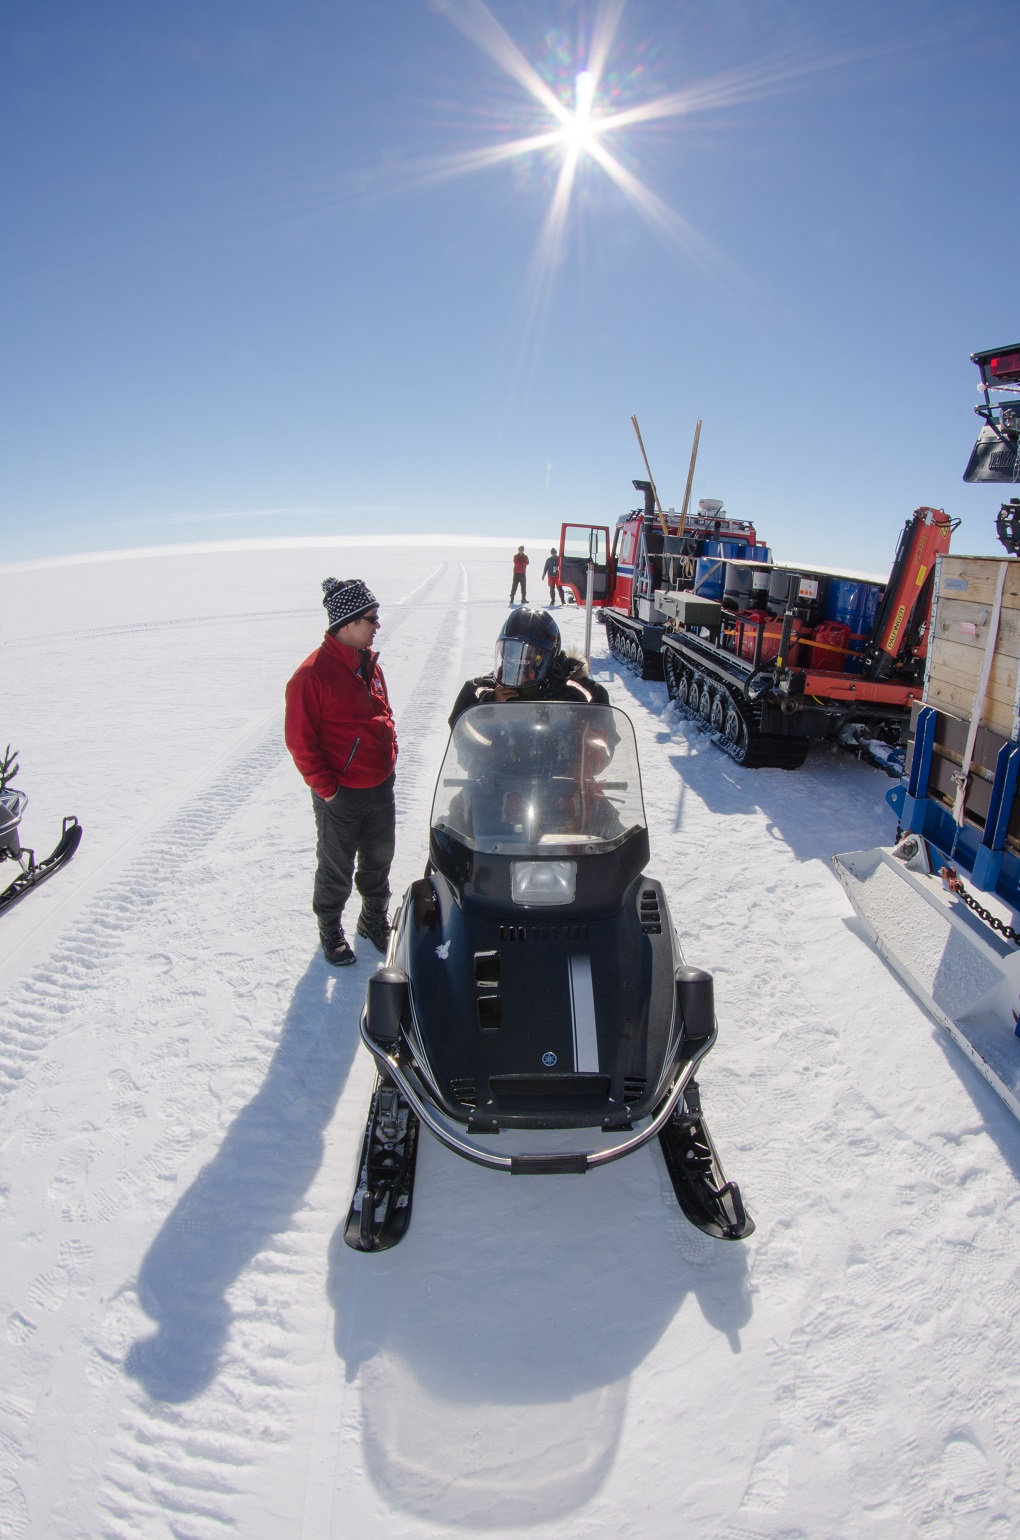 Vikram being briefed before going out for work [image by Peter Leopold / Norwegian Polar Institute]